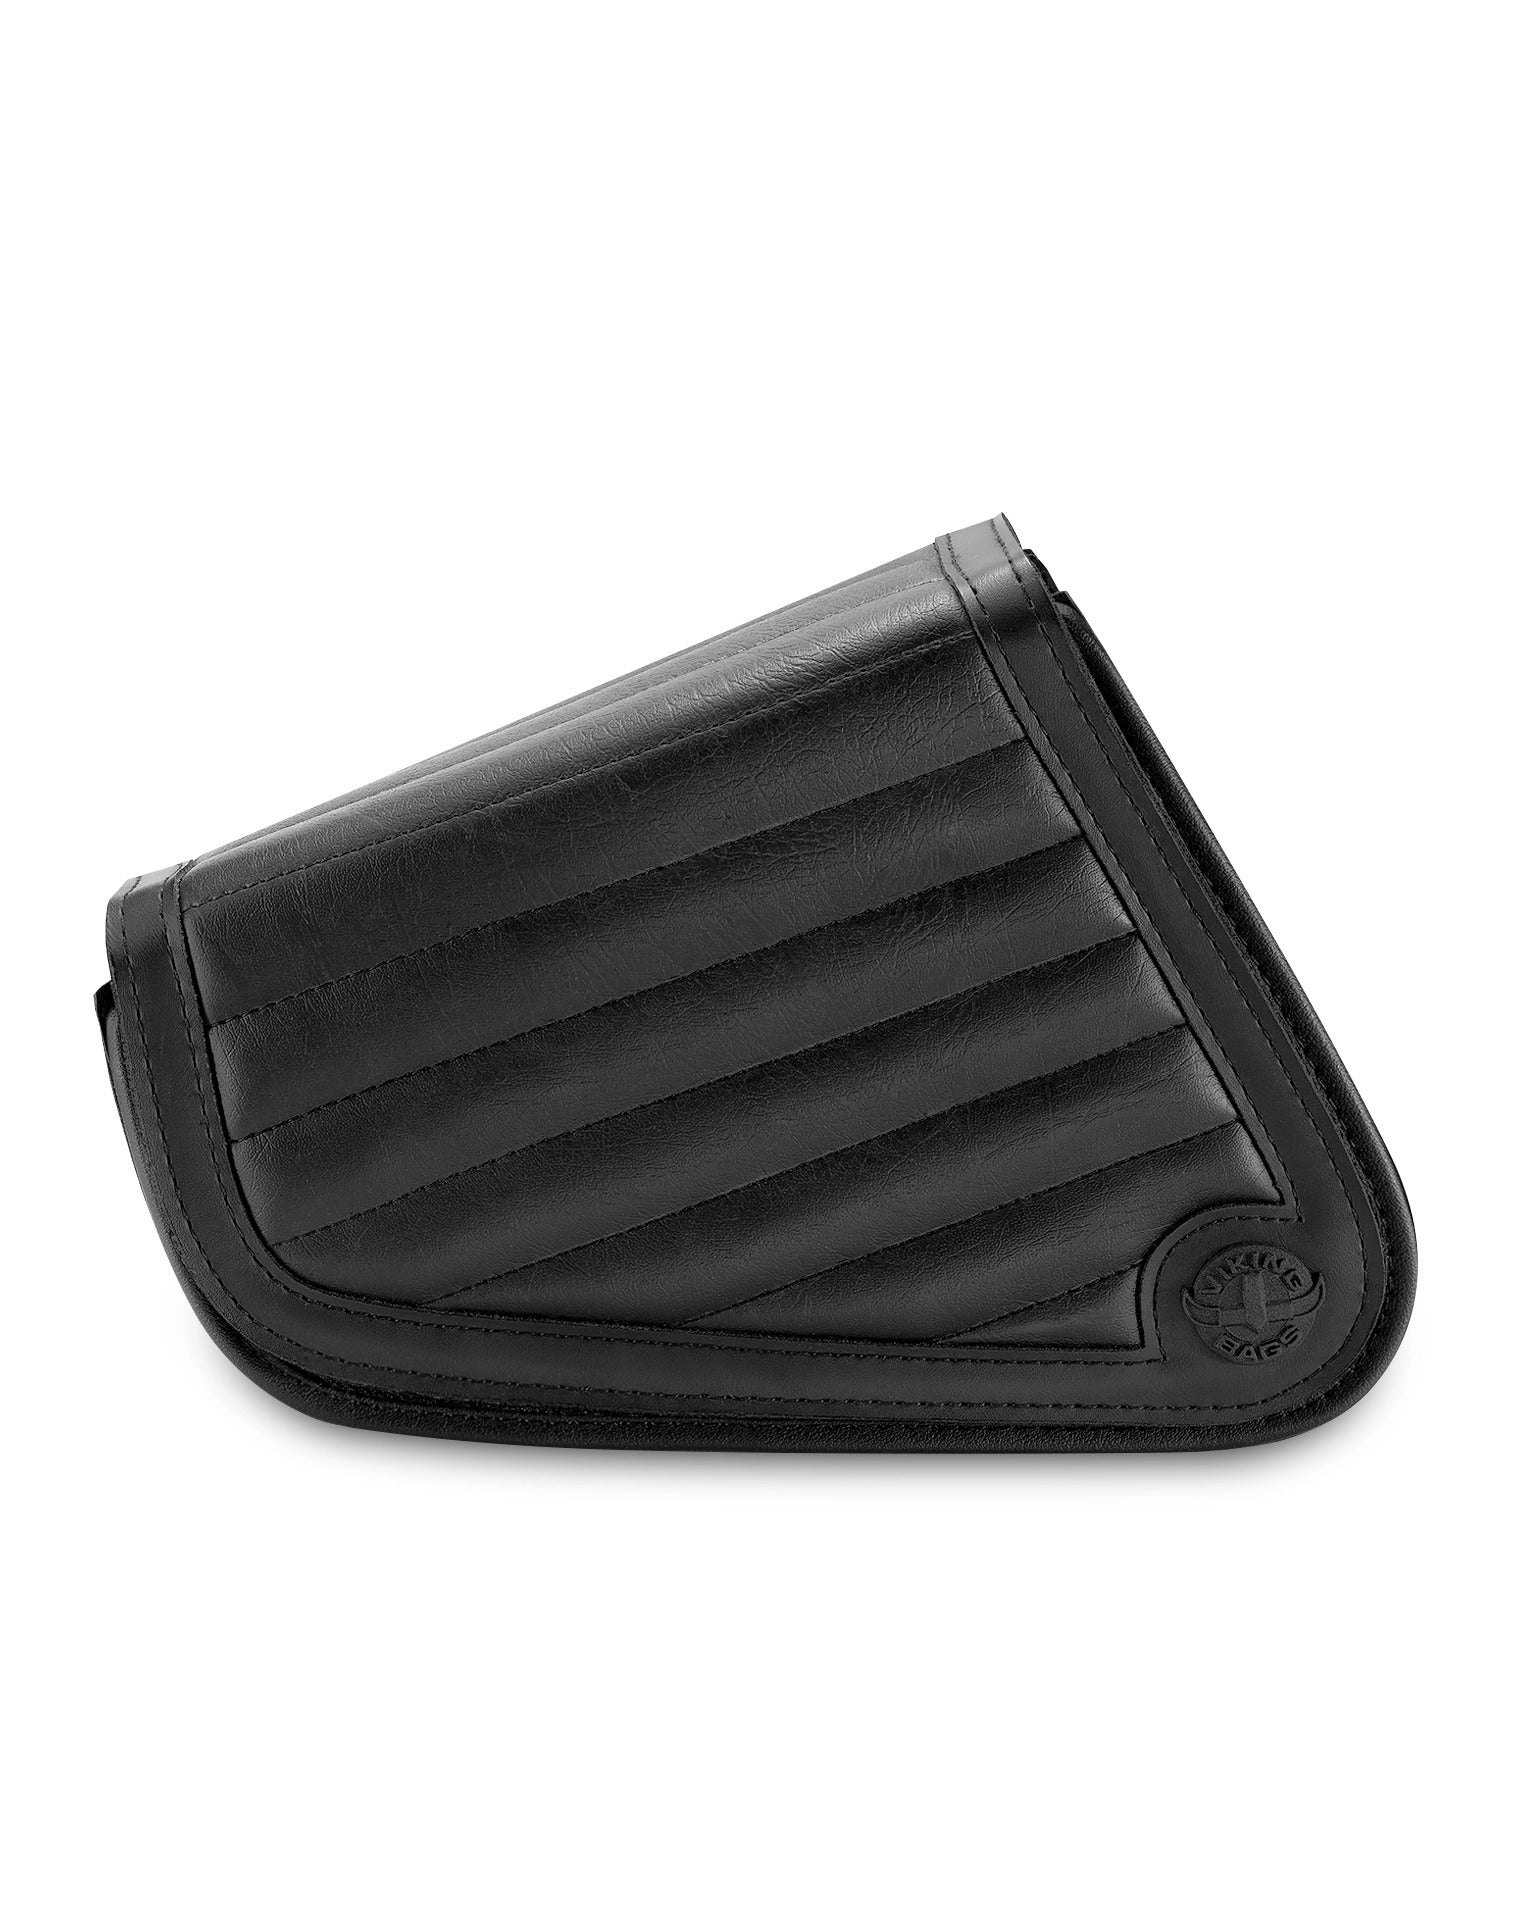 Viking Iron Born Horizontal Stitch Leather Motorcycle Swing Arm Bag for Harley Davidson Sportster Front View